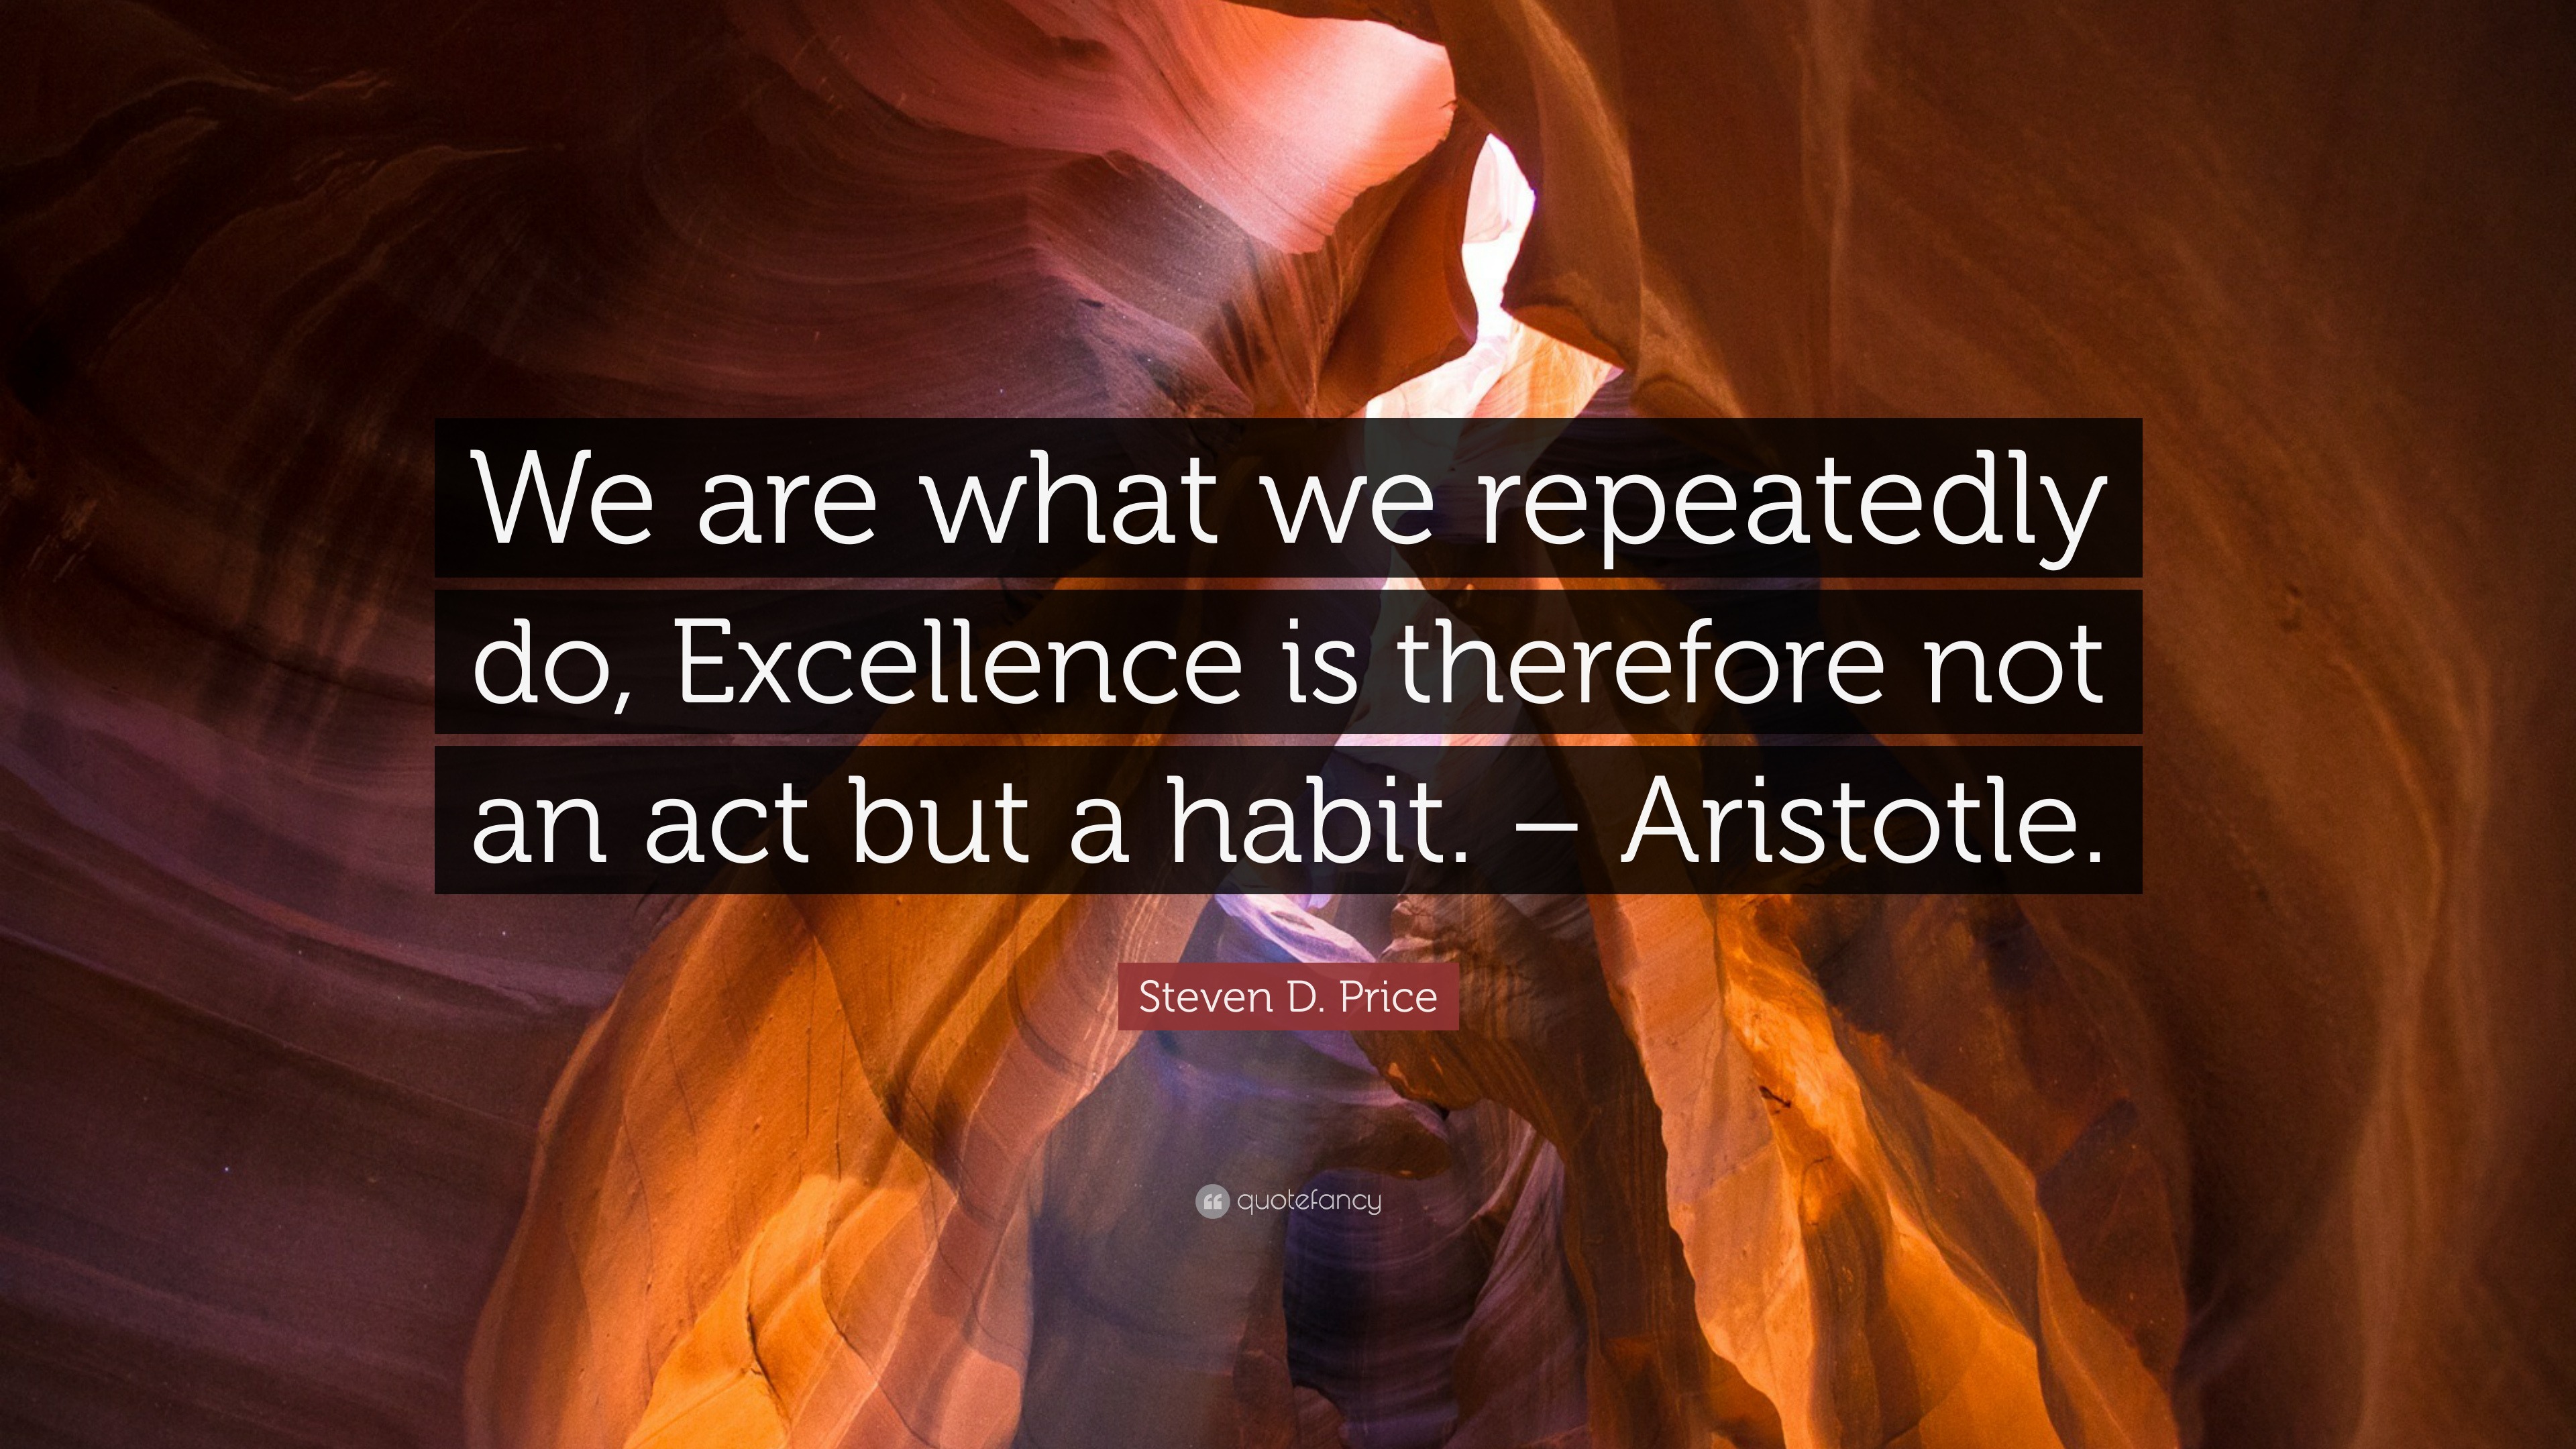 aristotle quotes we are what we repeatedly do